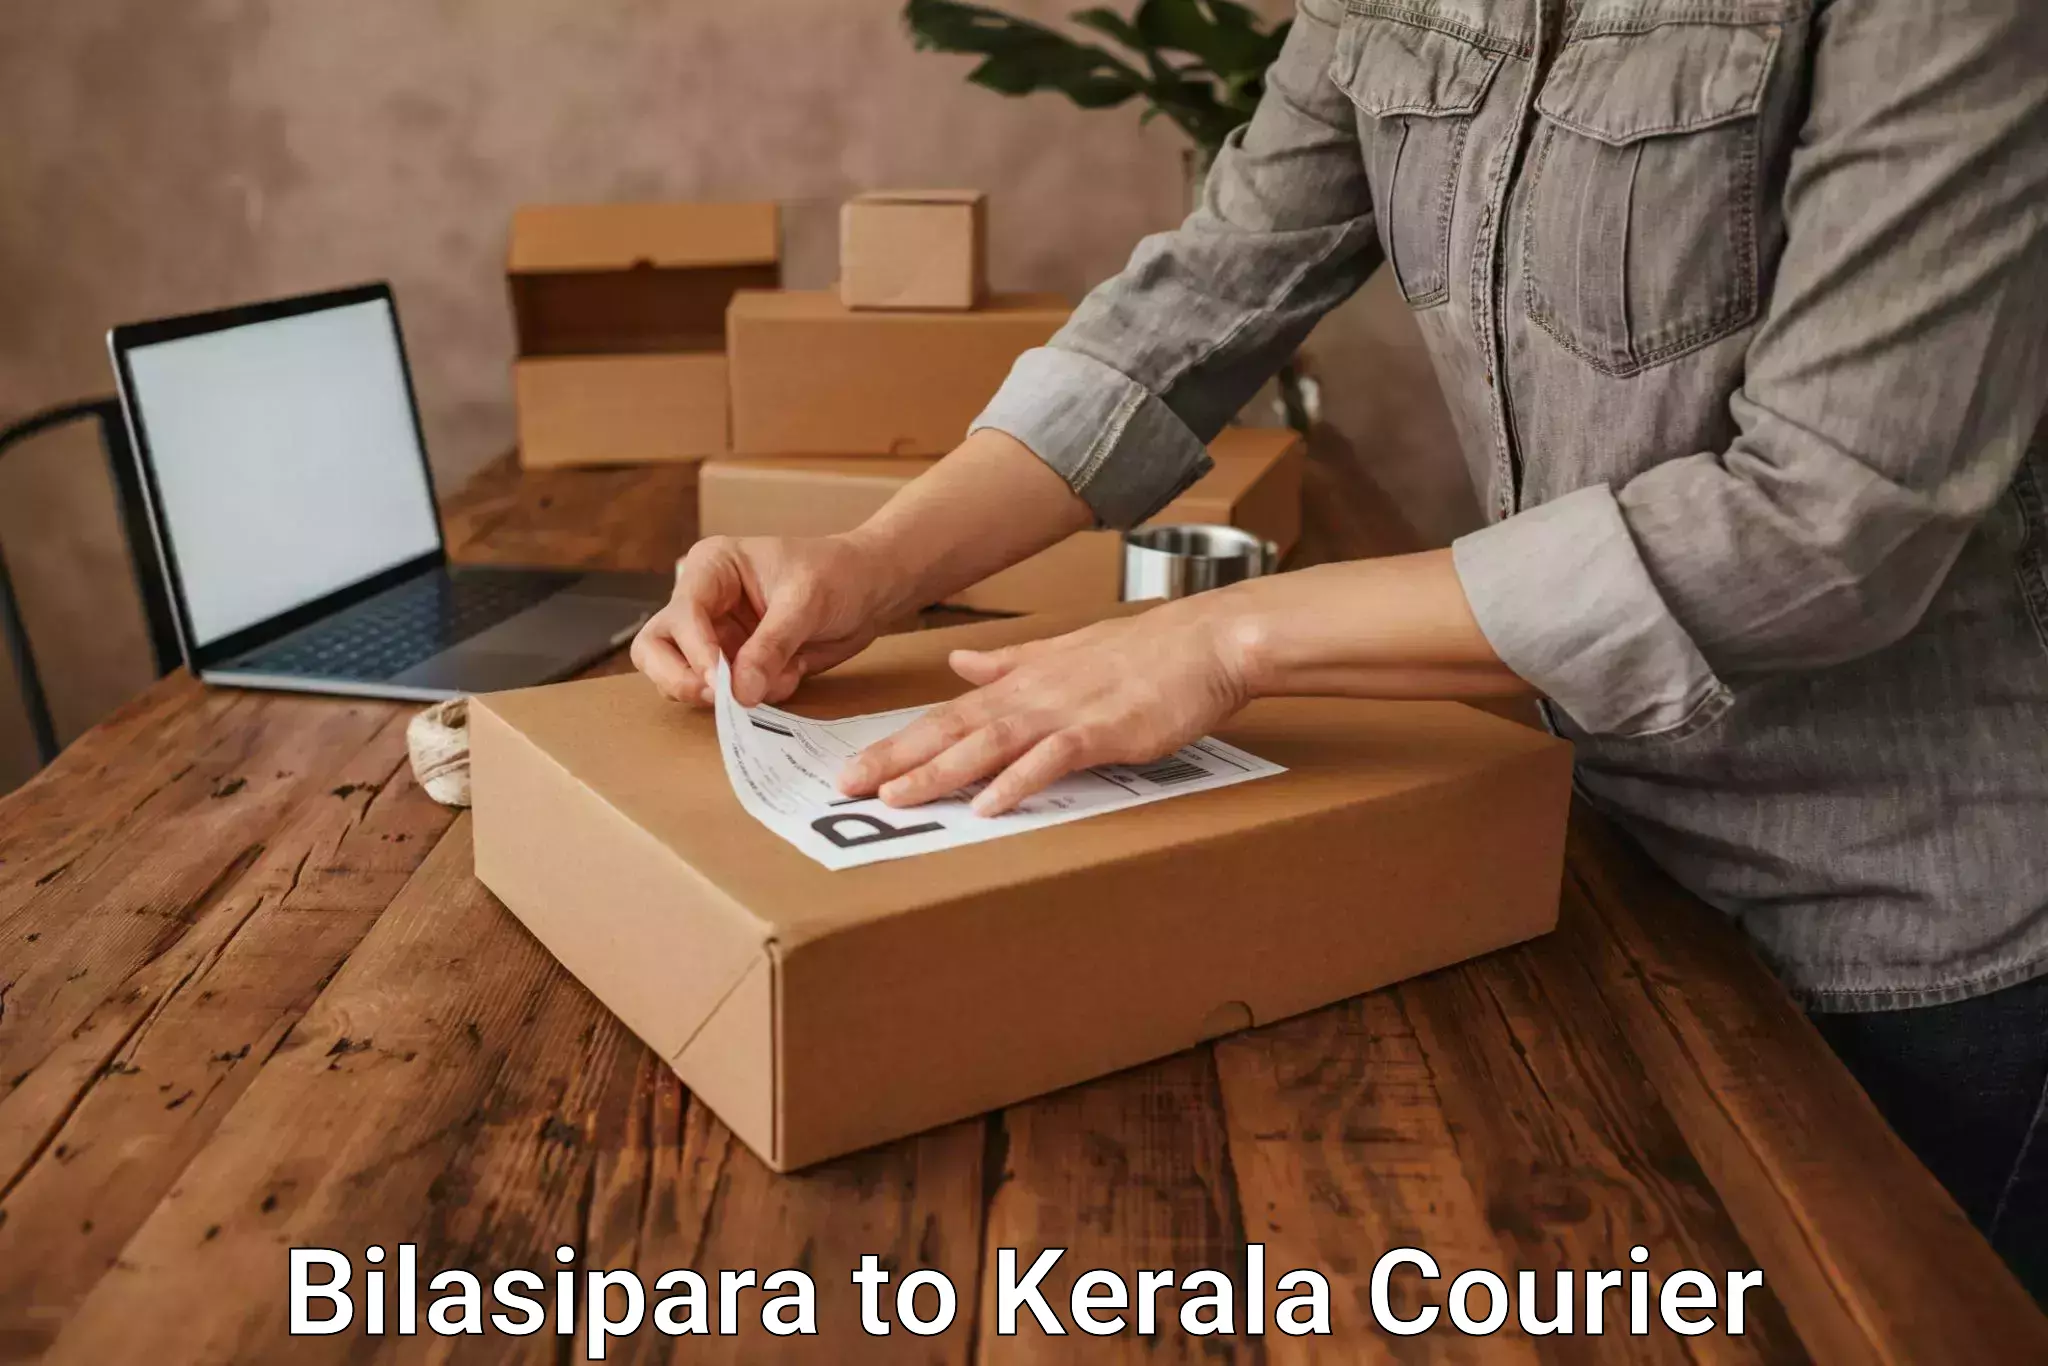 Cash on delivery service Bilasipara to Kerala